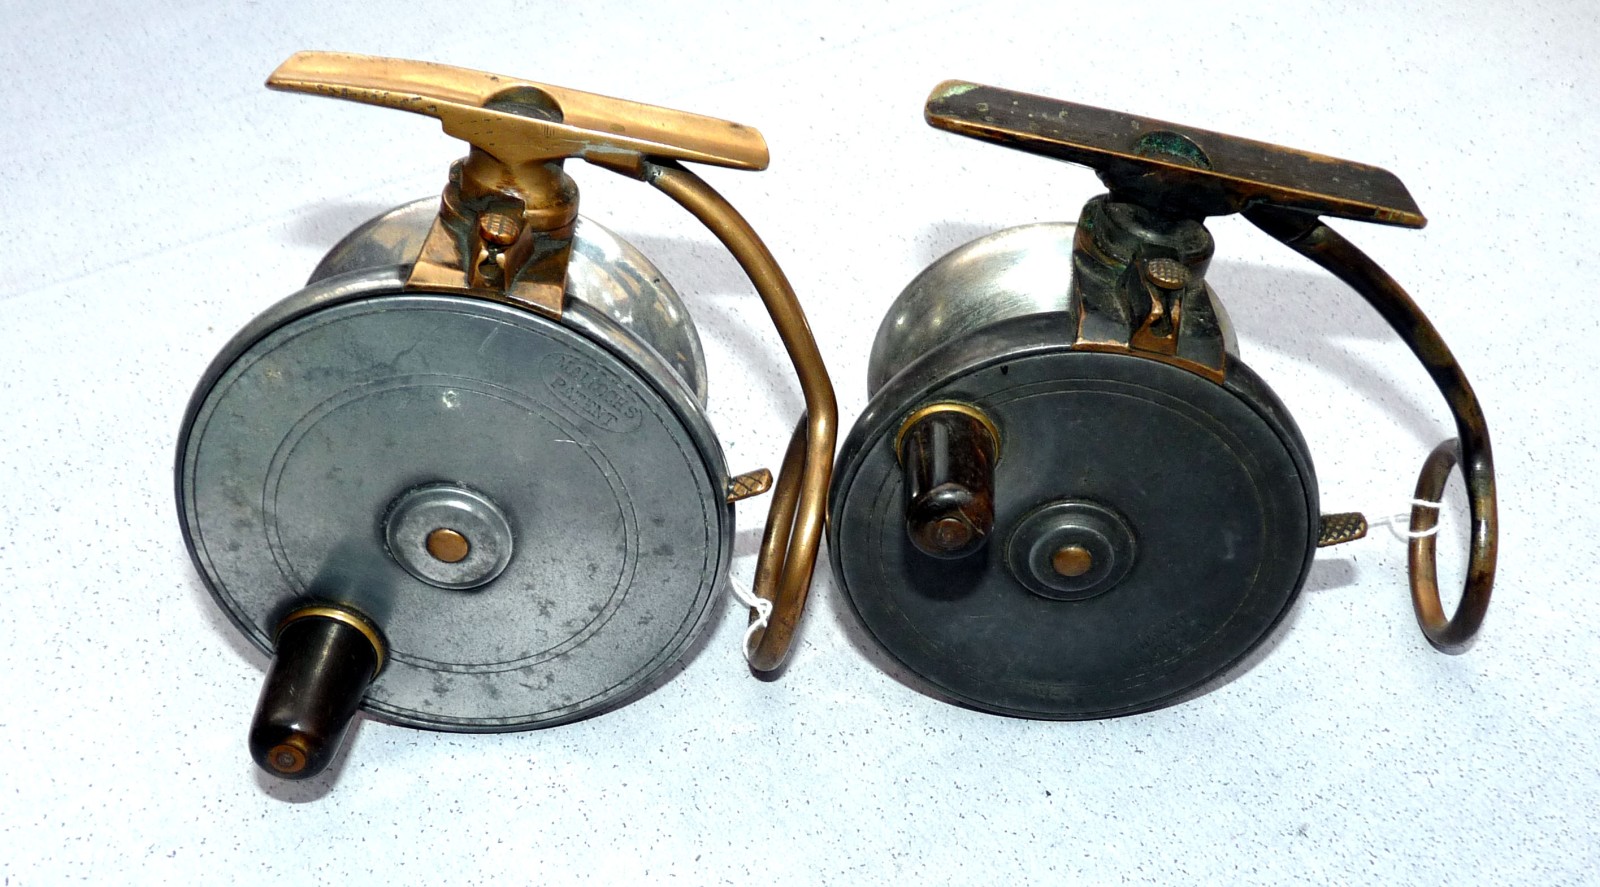 REELS (2): Pair of Malloch Patent alloy/brass side casting reels, a 3.25” diameter model with